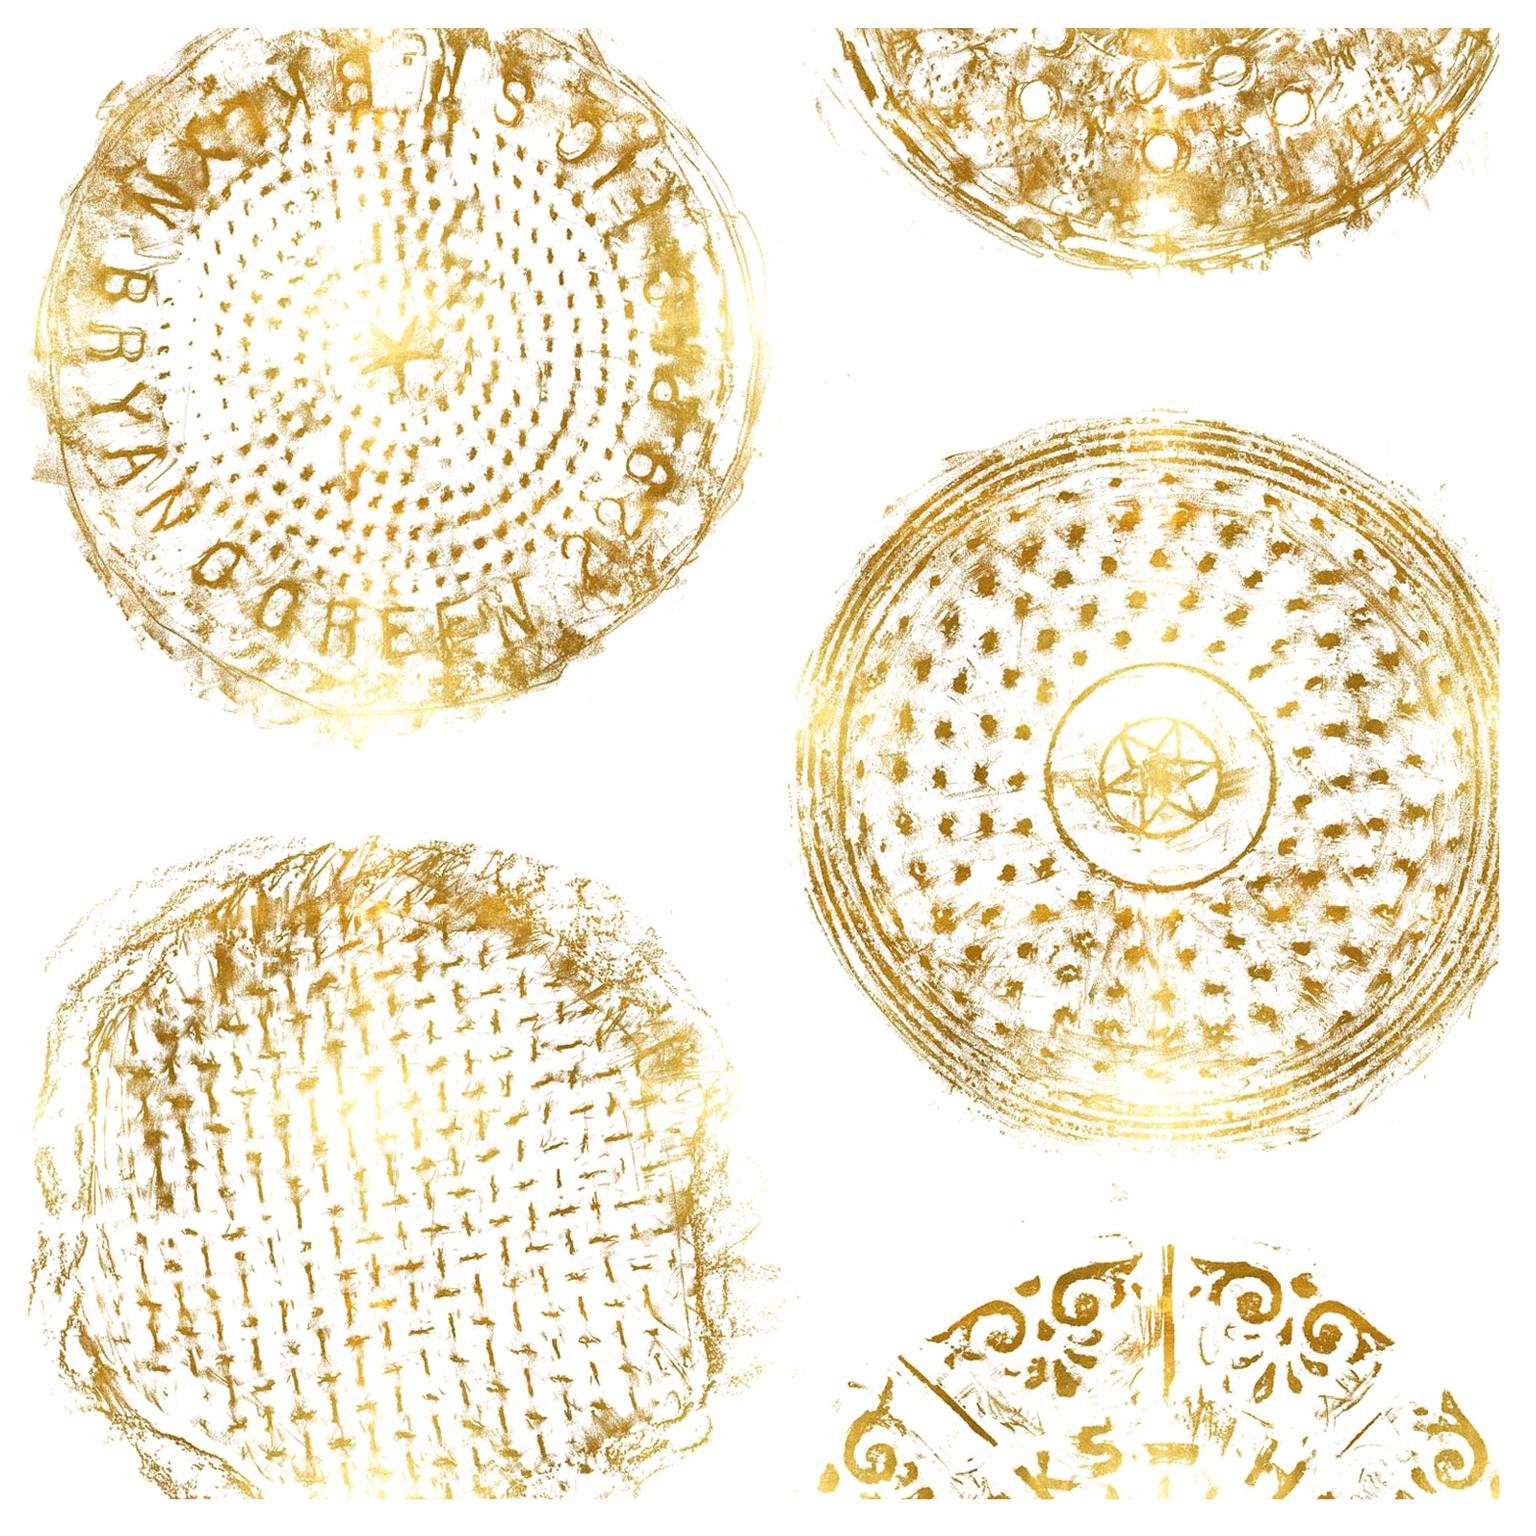 Brooklyn Manhole Printed Wallpaper, White with Gold Manhole Cover For Sale